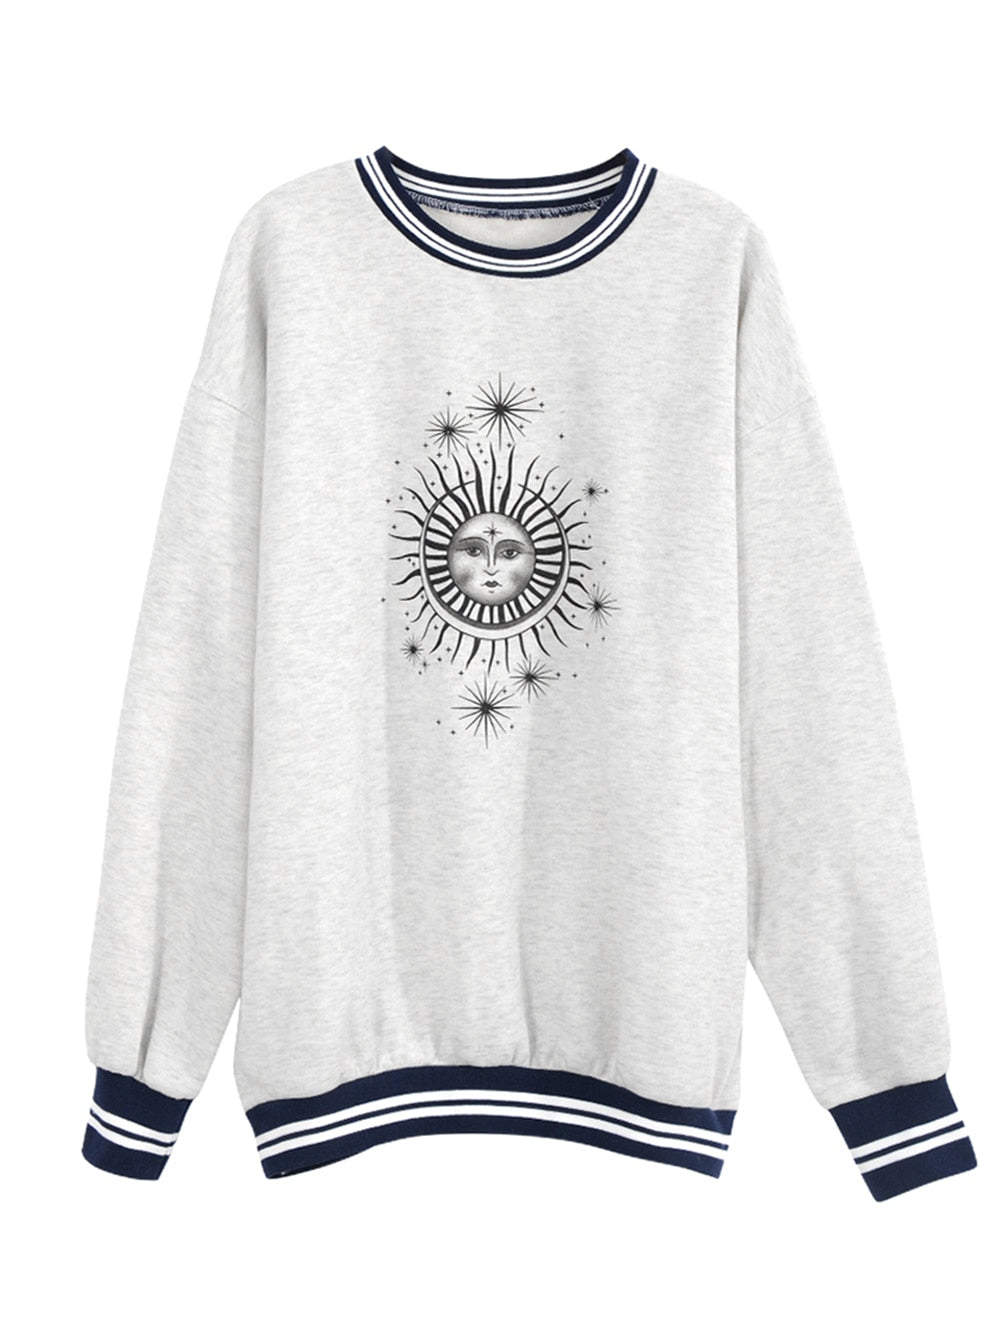 Otoño Invierno Sun Star Sweatershirts Mujer Casual Loose Pullover Cute Youg Girls Hoodies Mujer Ropa Gris Oversize